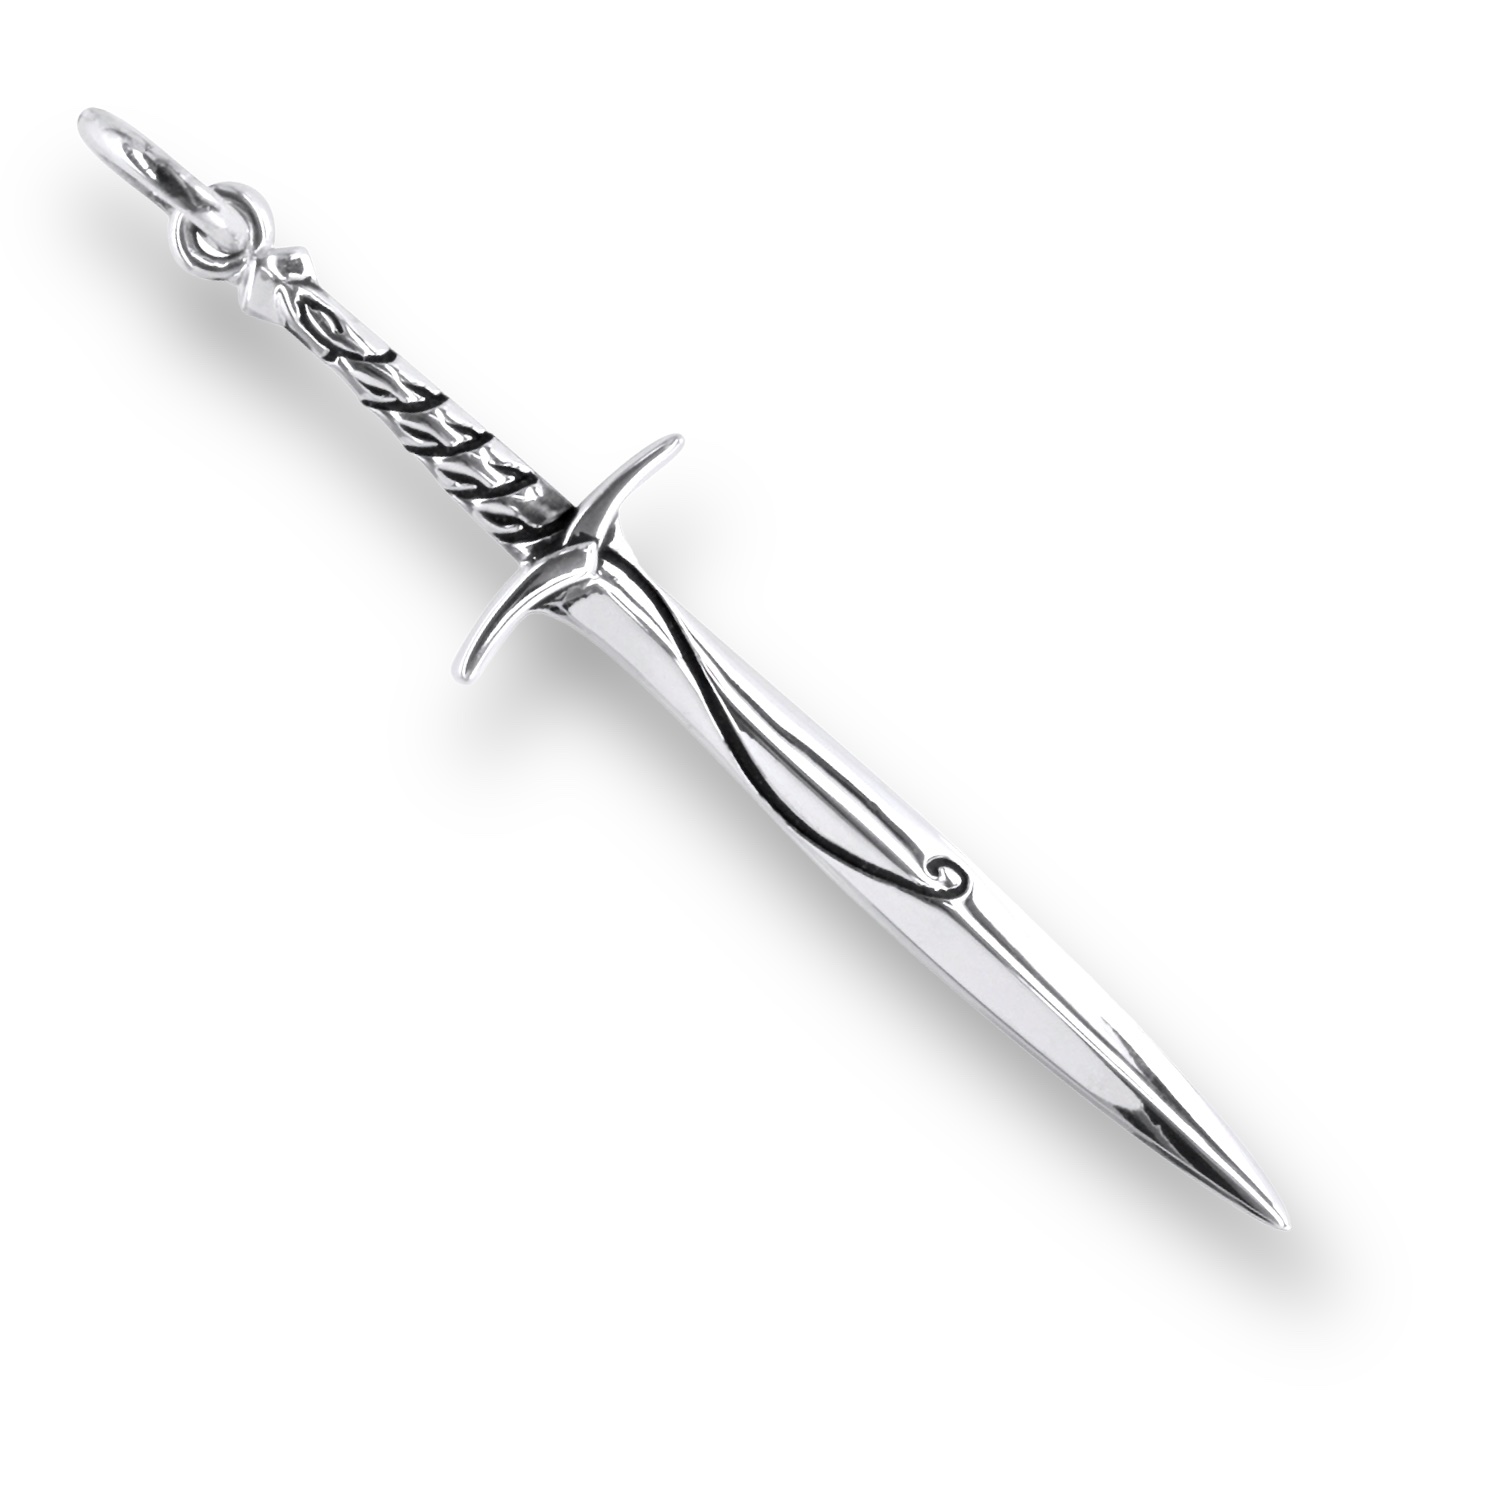 Sting is a sword owned by Bilbo Baggins. Bilbo initially found it in the lair of the giant spider, Shelob, during his journey with the dwarves to reclaim the Lonely Mountain from the dragon Smaug.